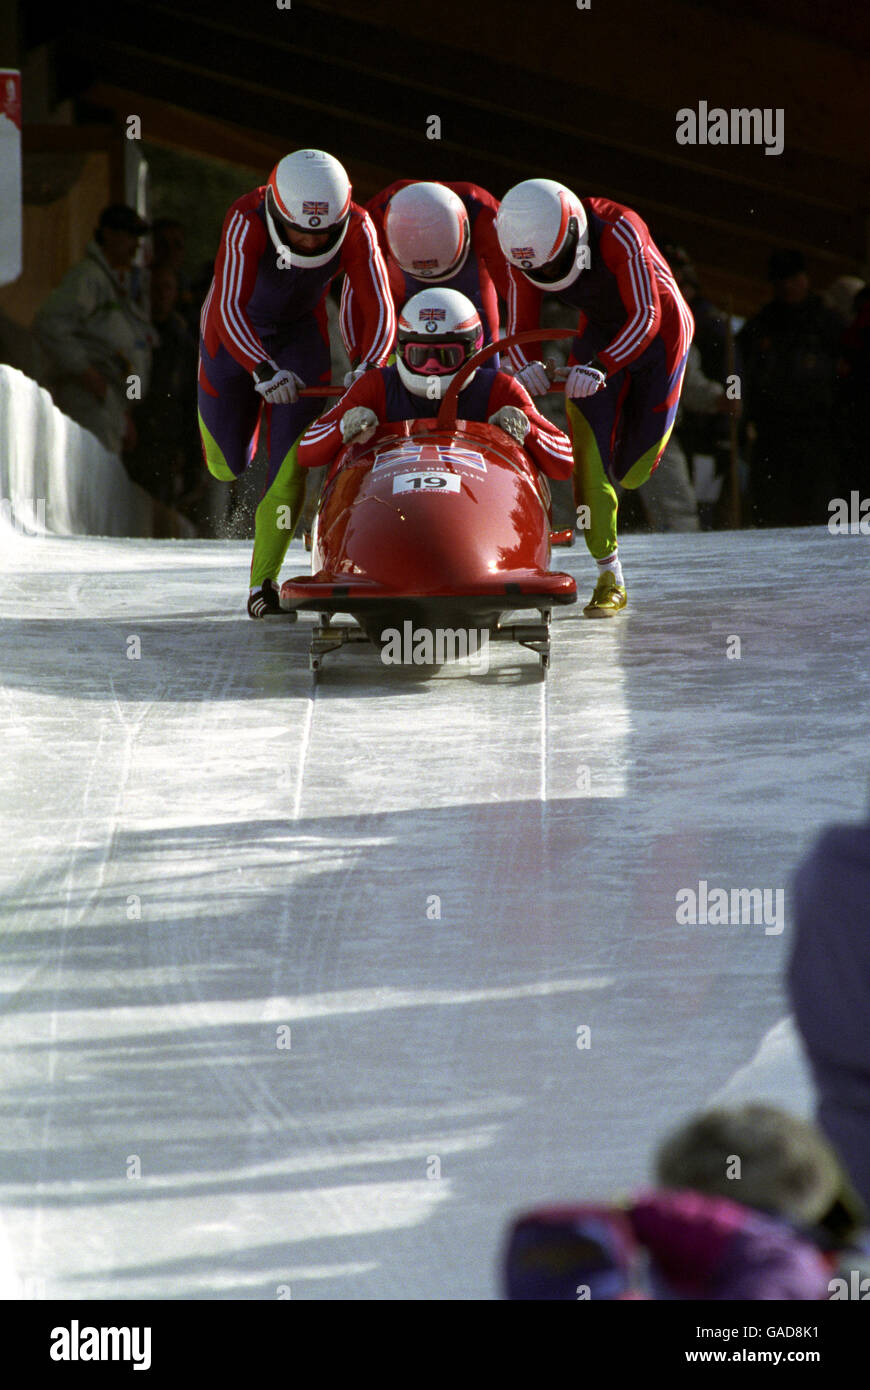 Winter Olympic Games 1992 - Albertville. Great Britain's Four Man Bobsleigh team at the start of their run. Stock Photo